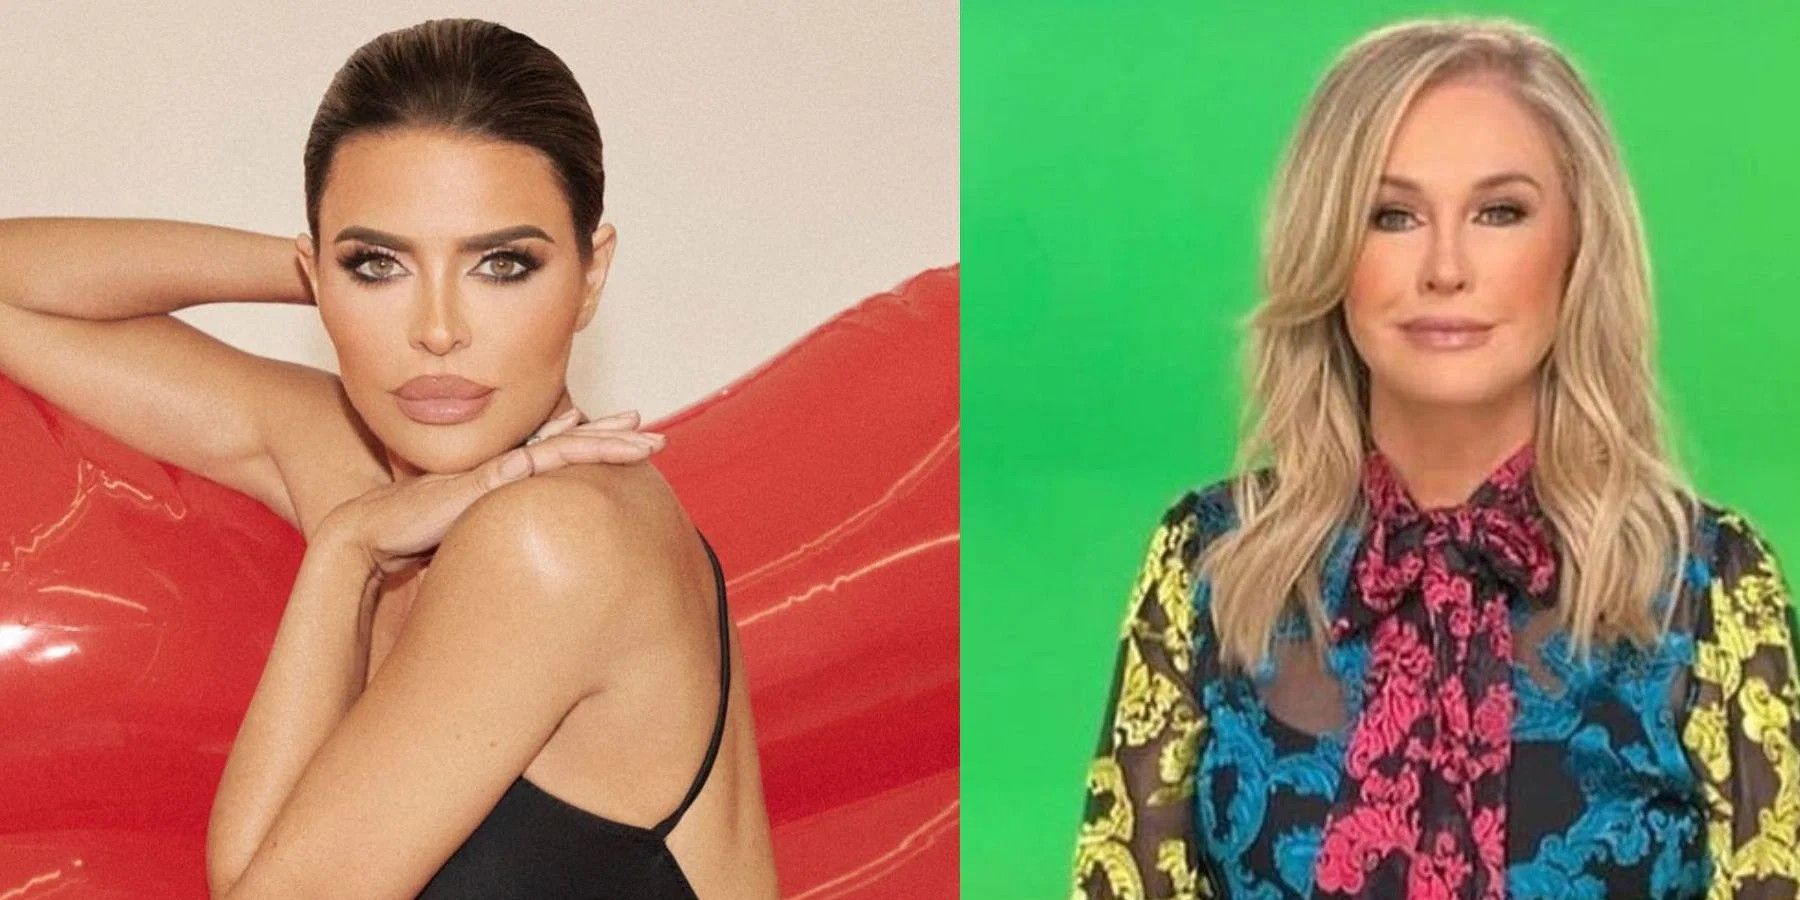 Split image of Lisa Rinna with a glam shot and Kathy Hilton wearing a blouse from RHOBH